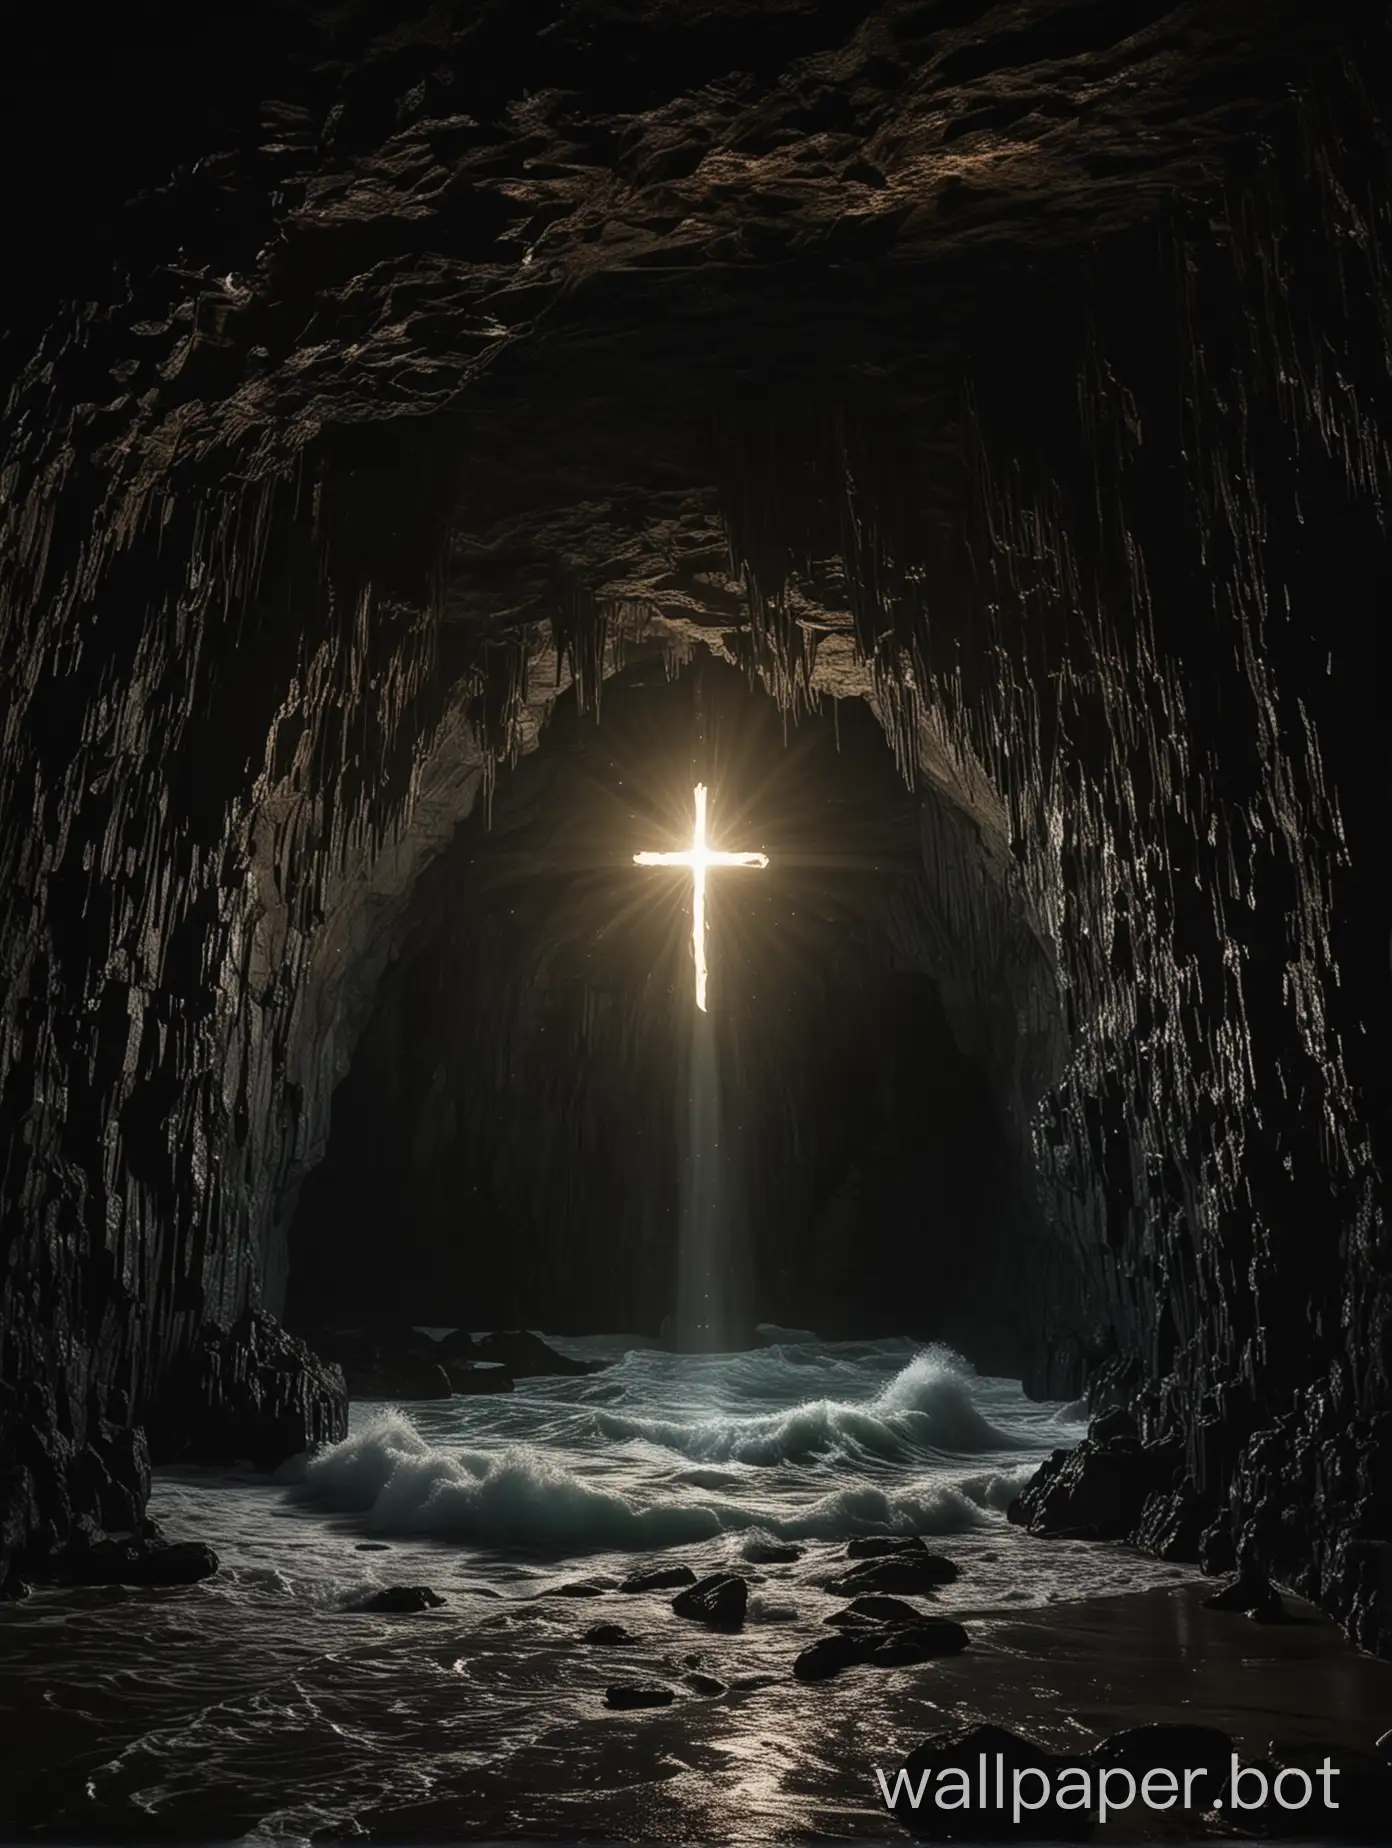 Glowing-Cross-in-Dark-Cave-with-Echoing-Waves